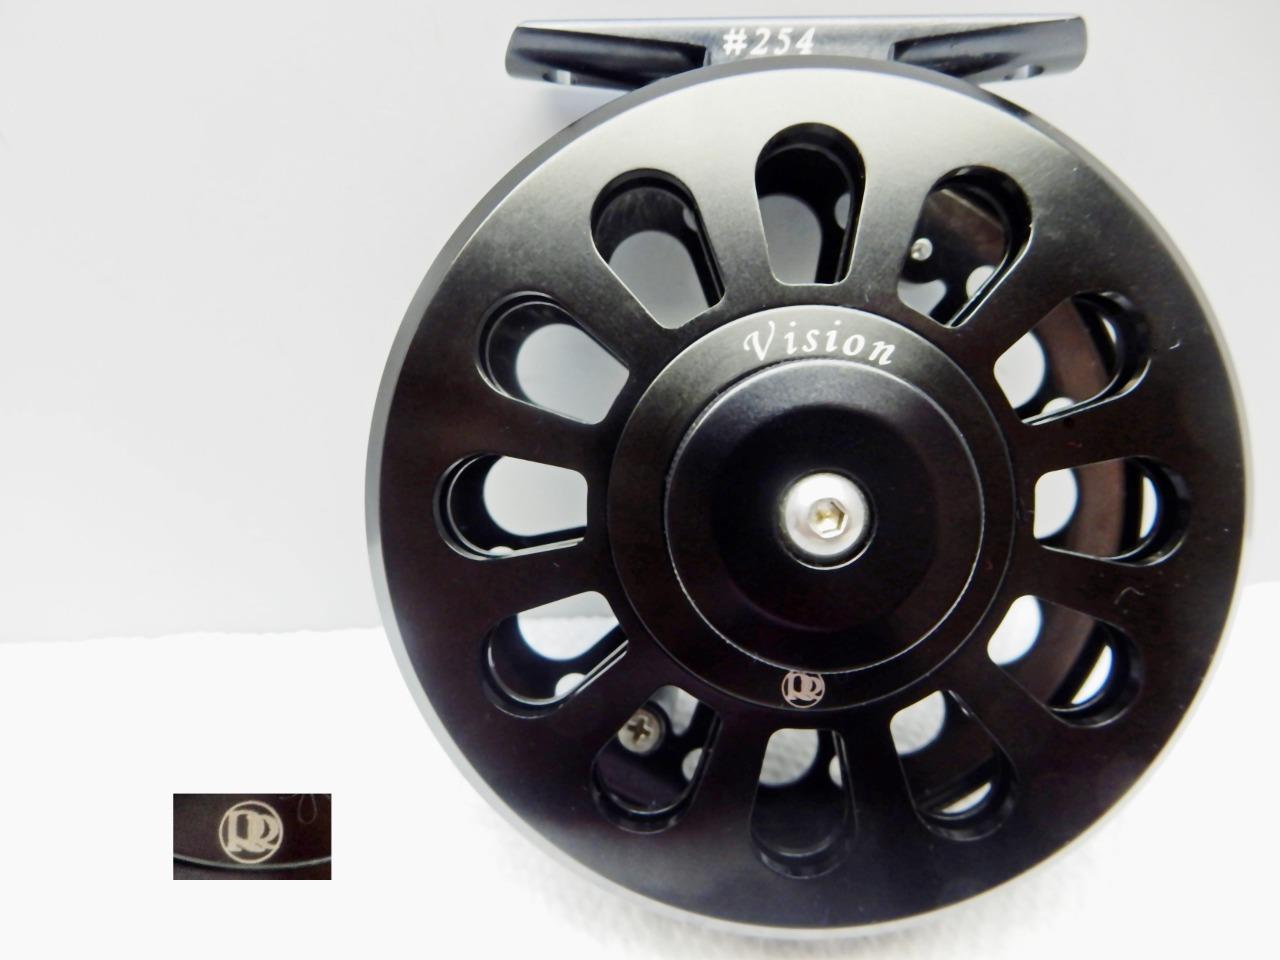 Ross San Miguel reel for 6 wt  The North American Fly Fishing Forum -  sponsored by Thomas Turner